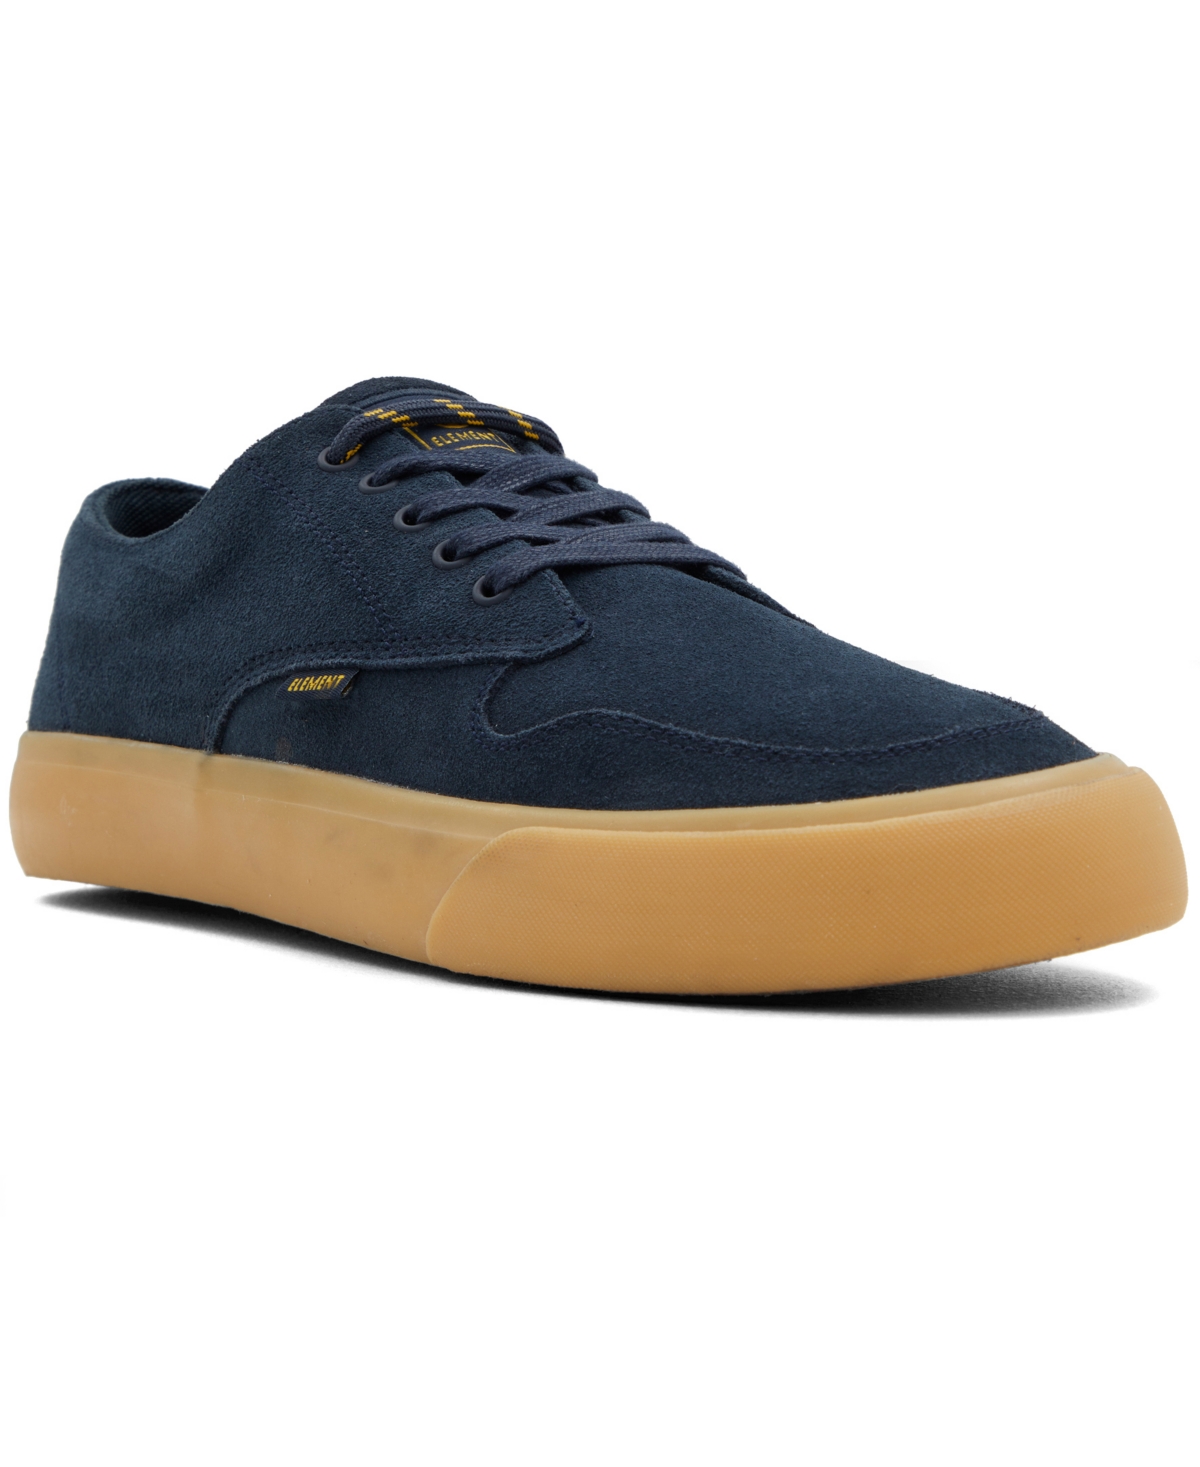 Men's Topaz C3 Lace Up Shoes - Other Navy